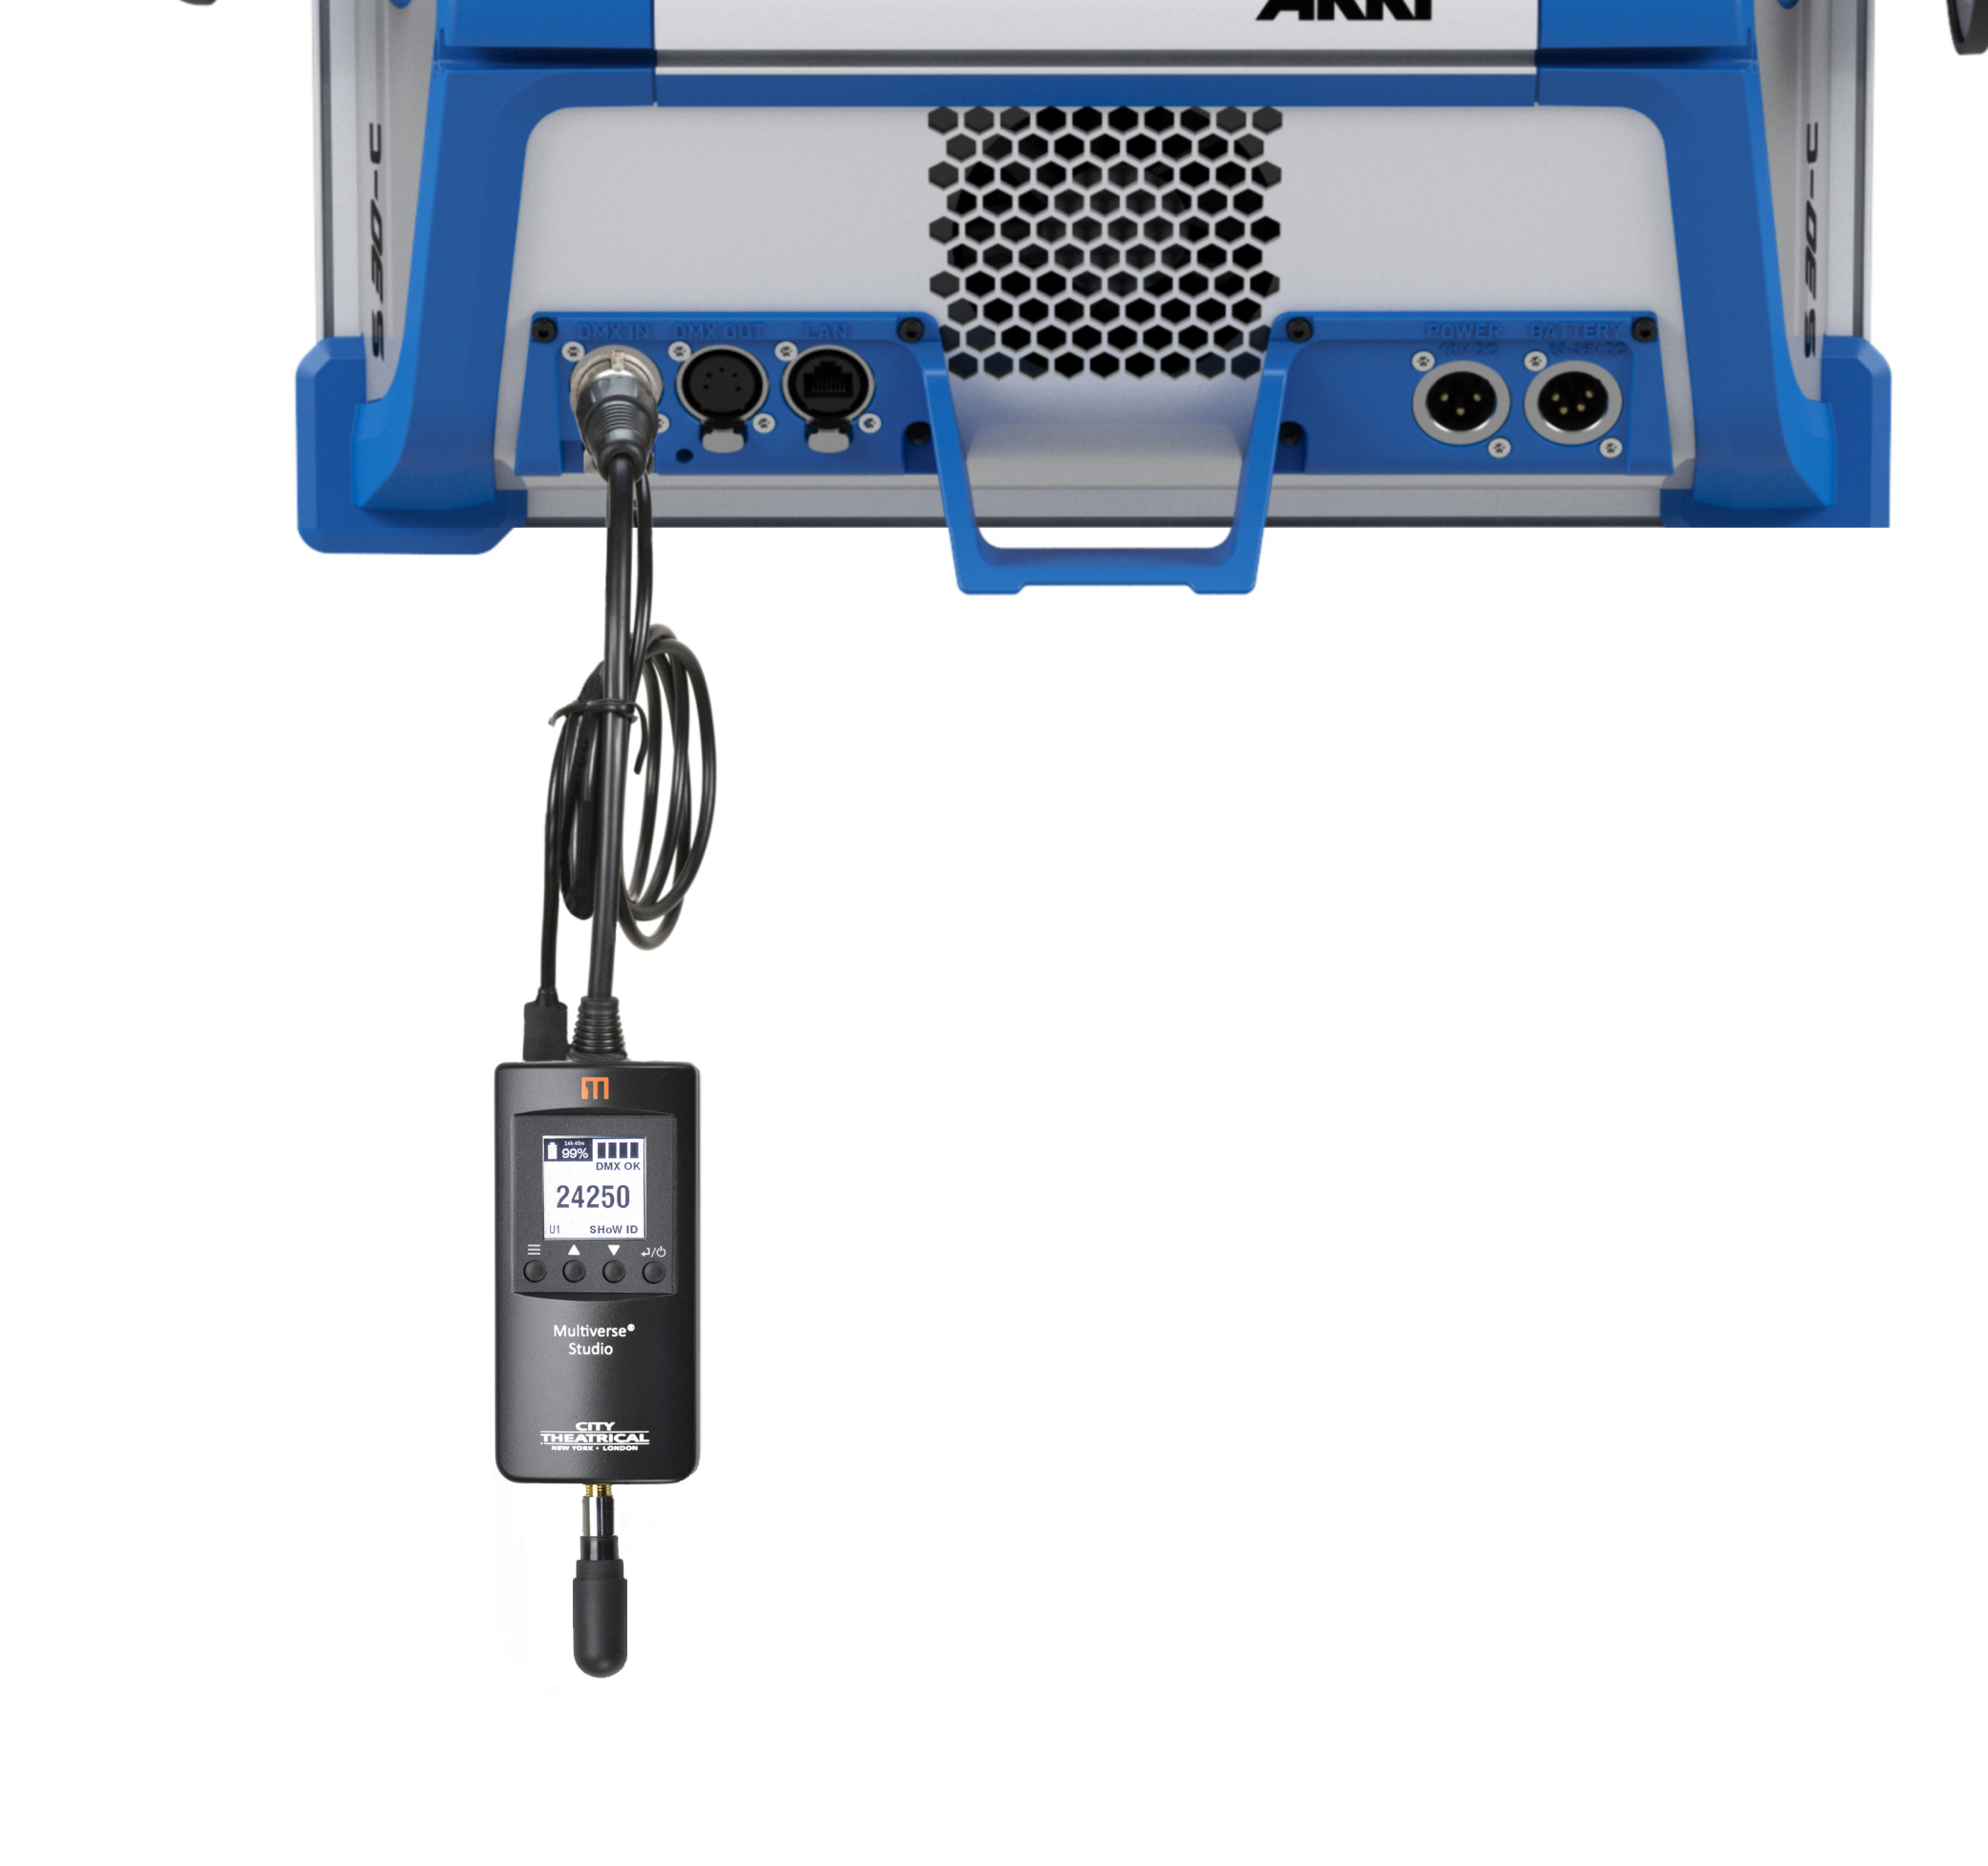 Multiverse Studio Receiver connected to an ARRI fixture